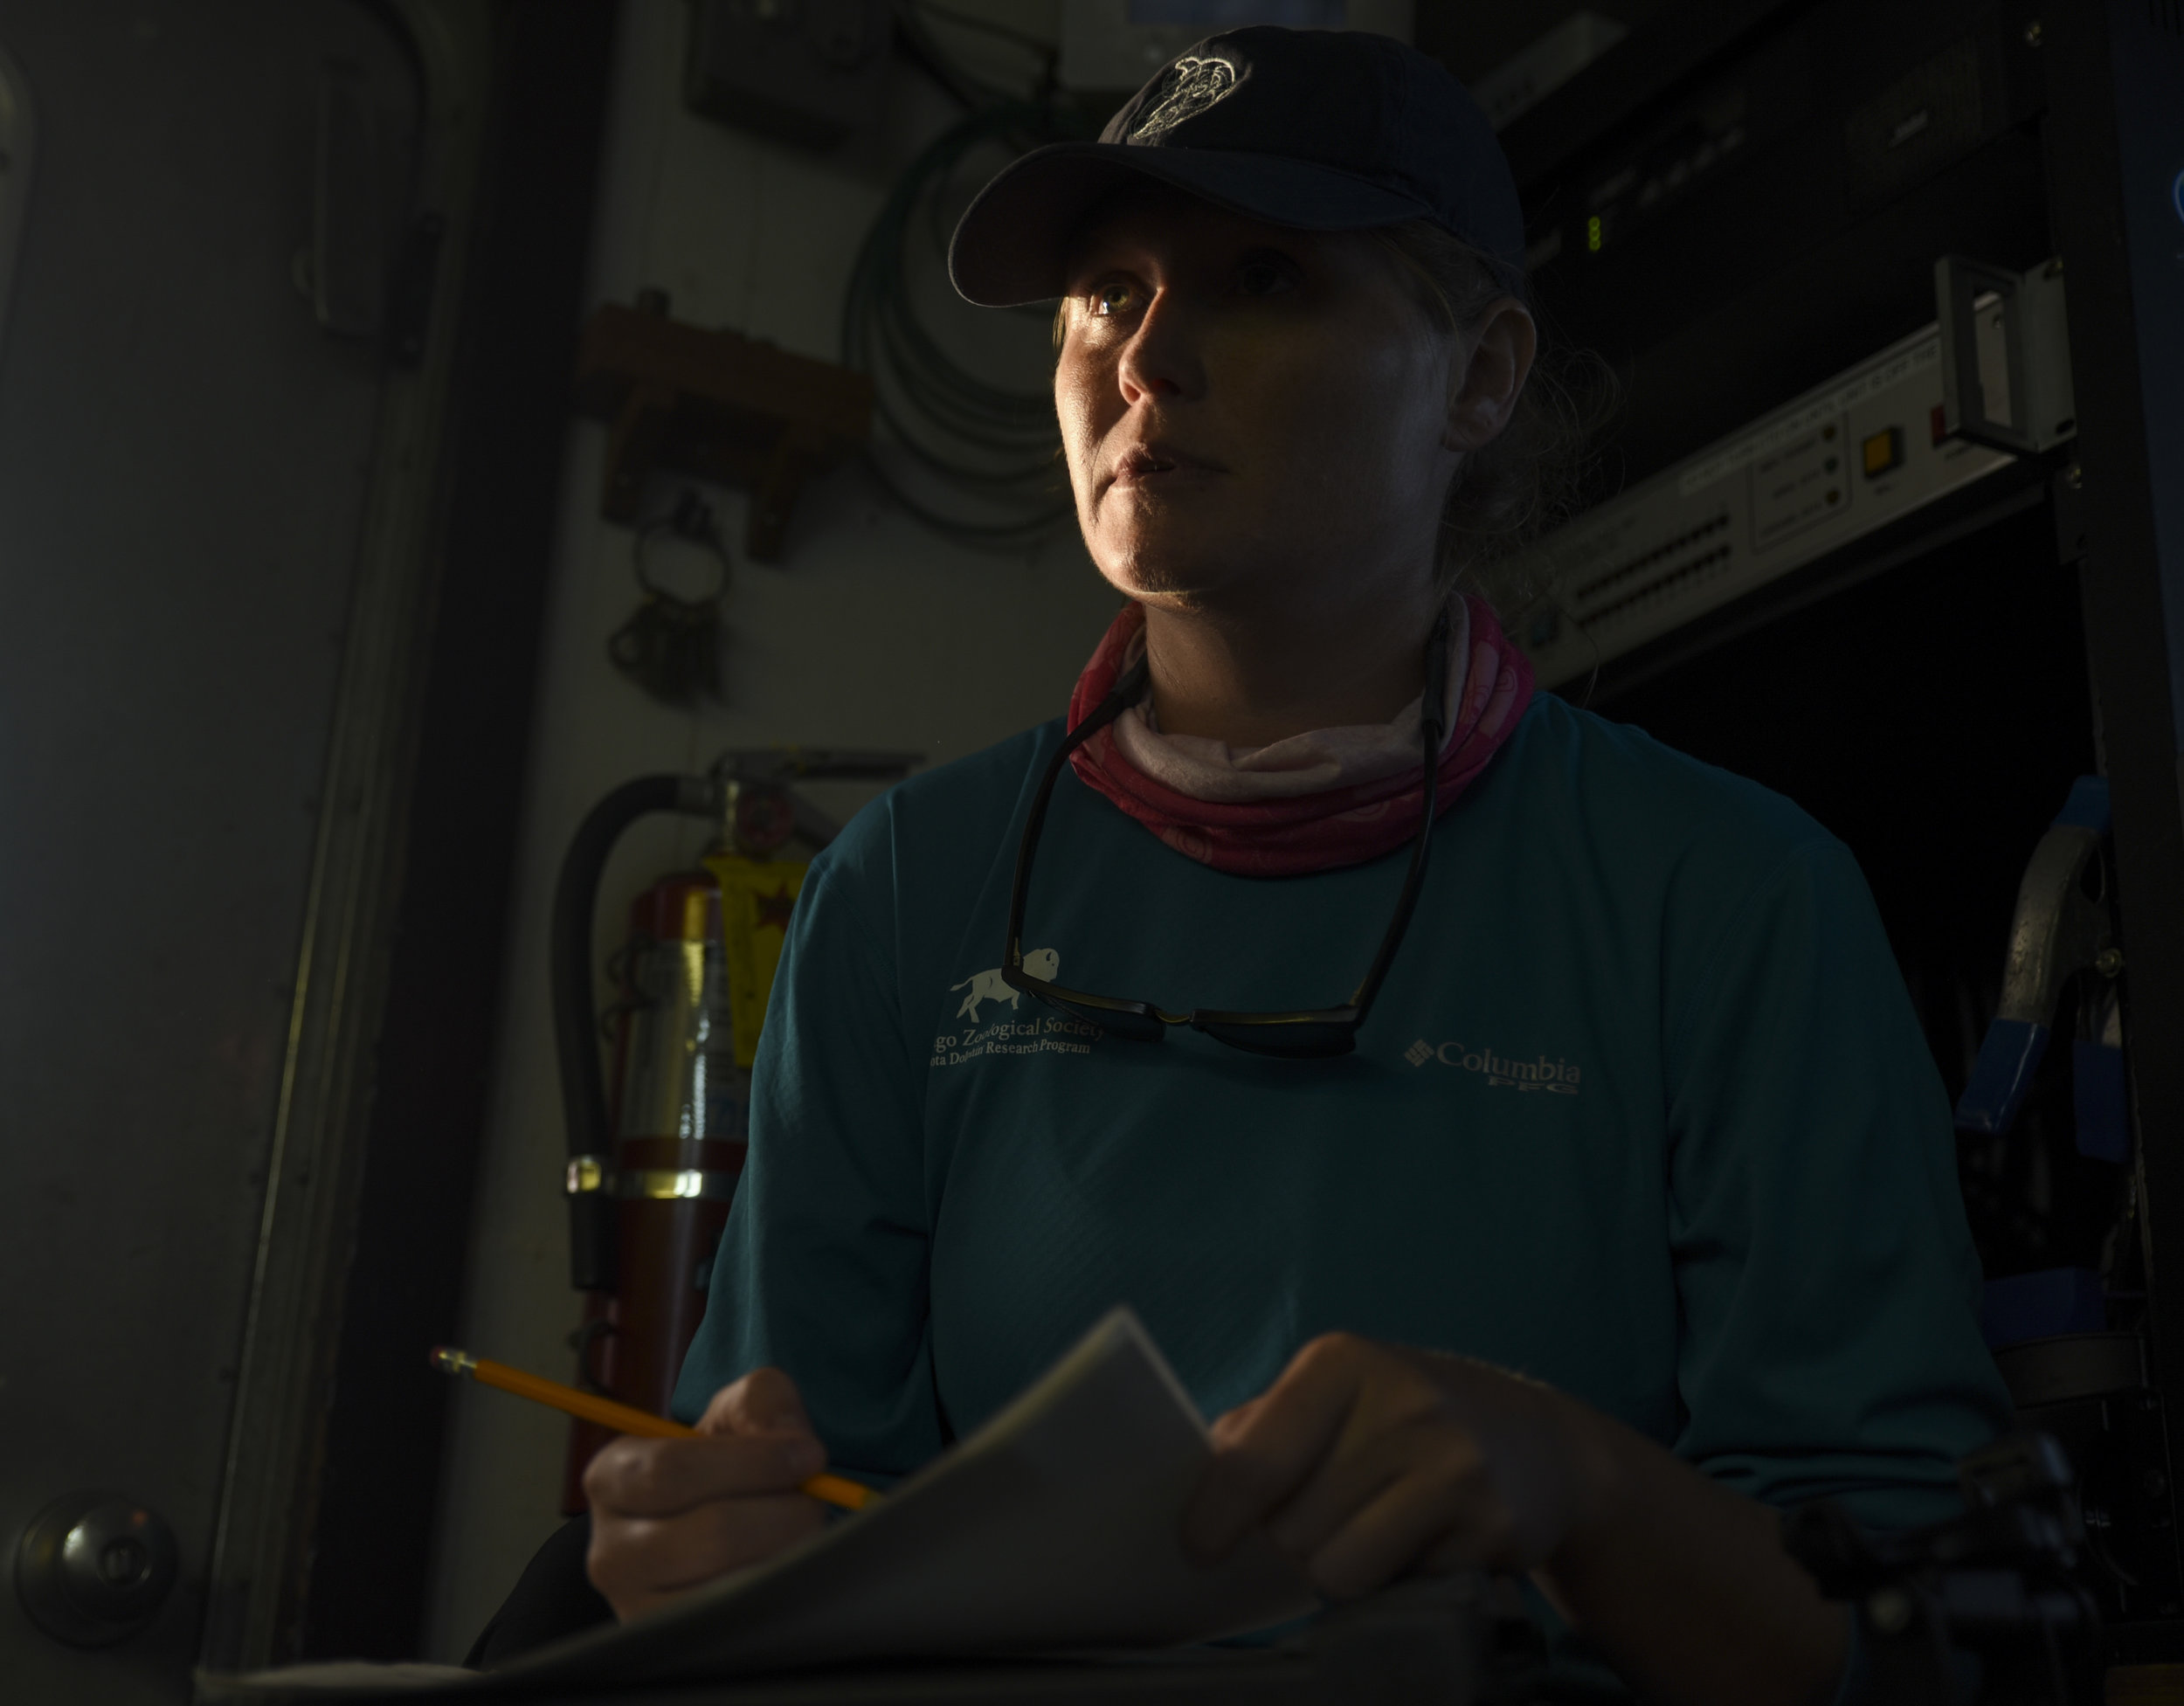  Kristen Wilkinson, a University of Florida PhD candidate, looks up from filling in a data sheet as the R/V Bellows steams back to Tampa Bay at sunset. 